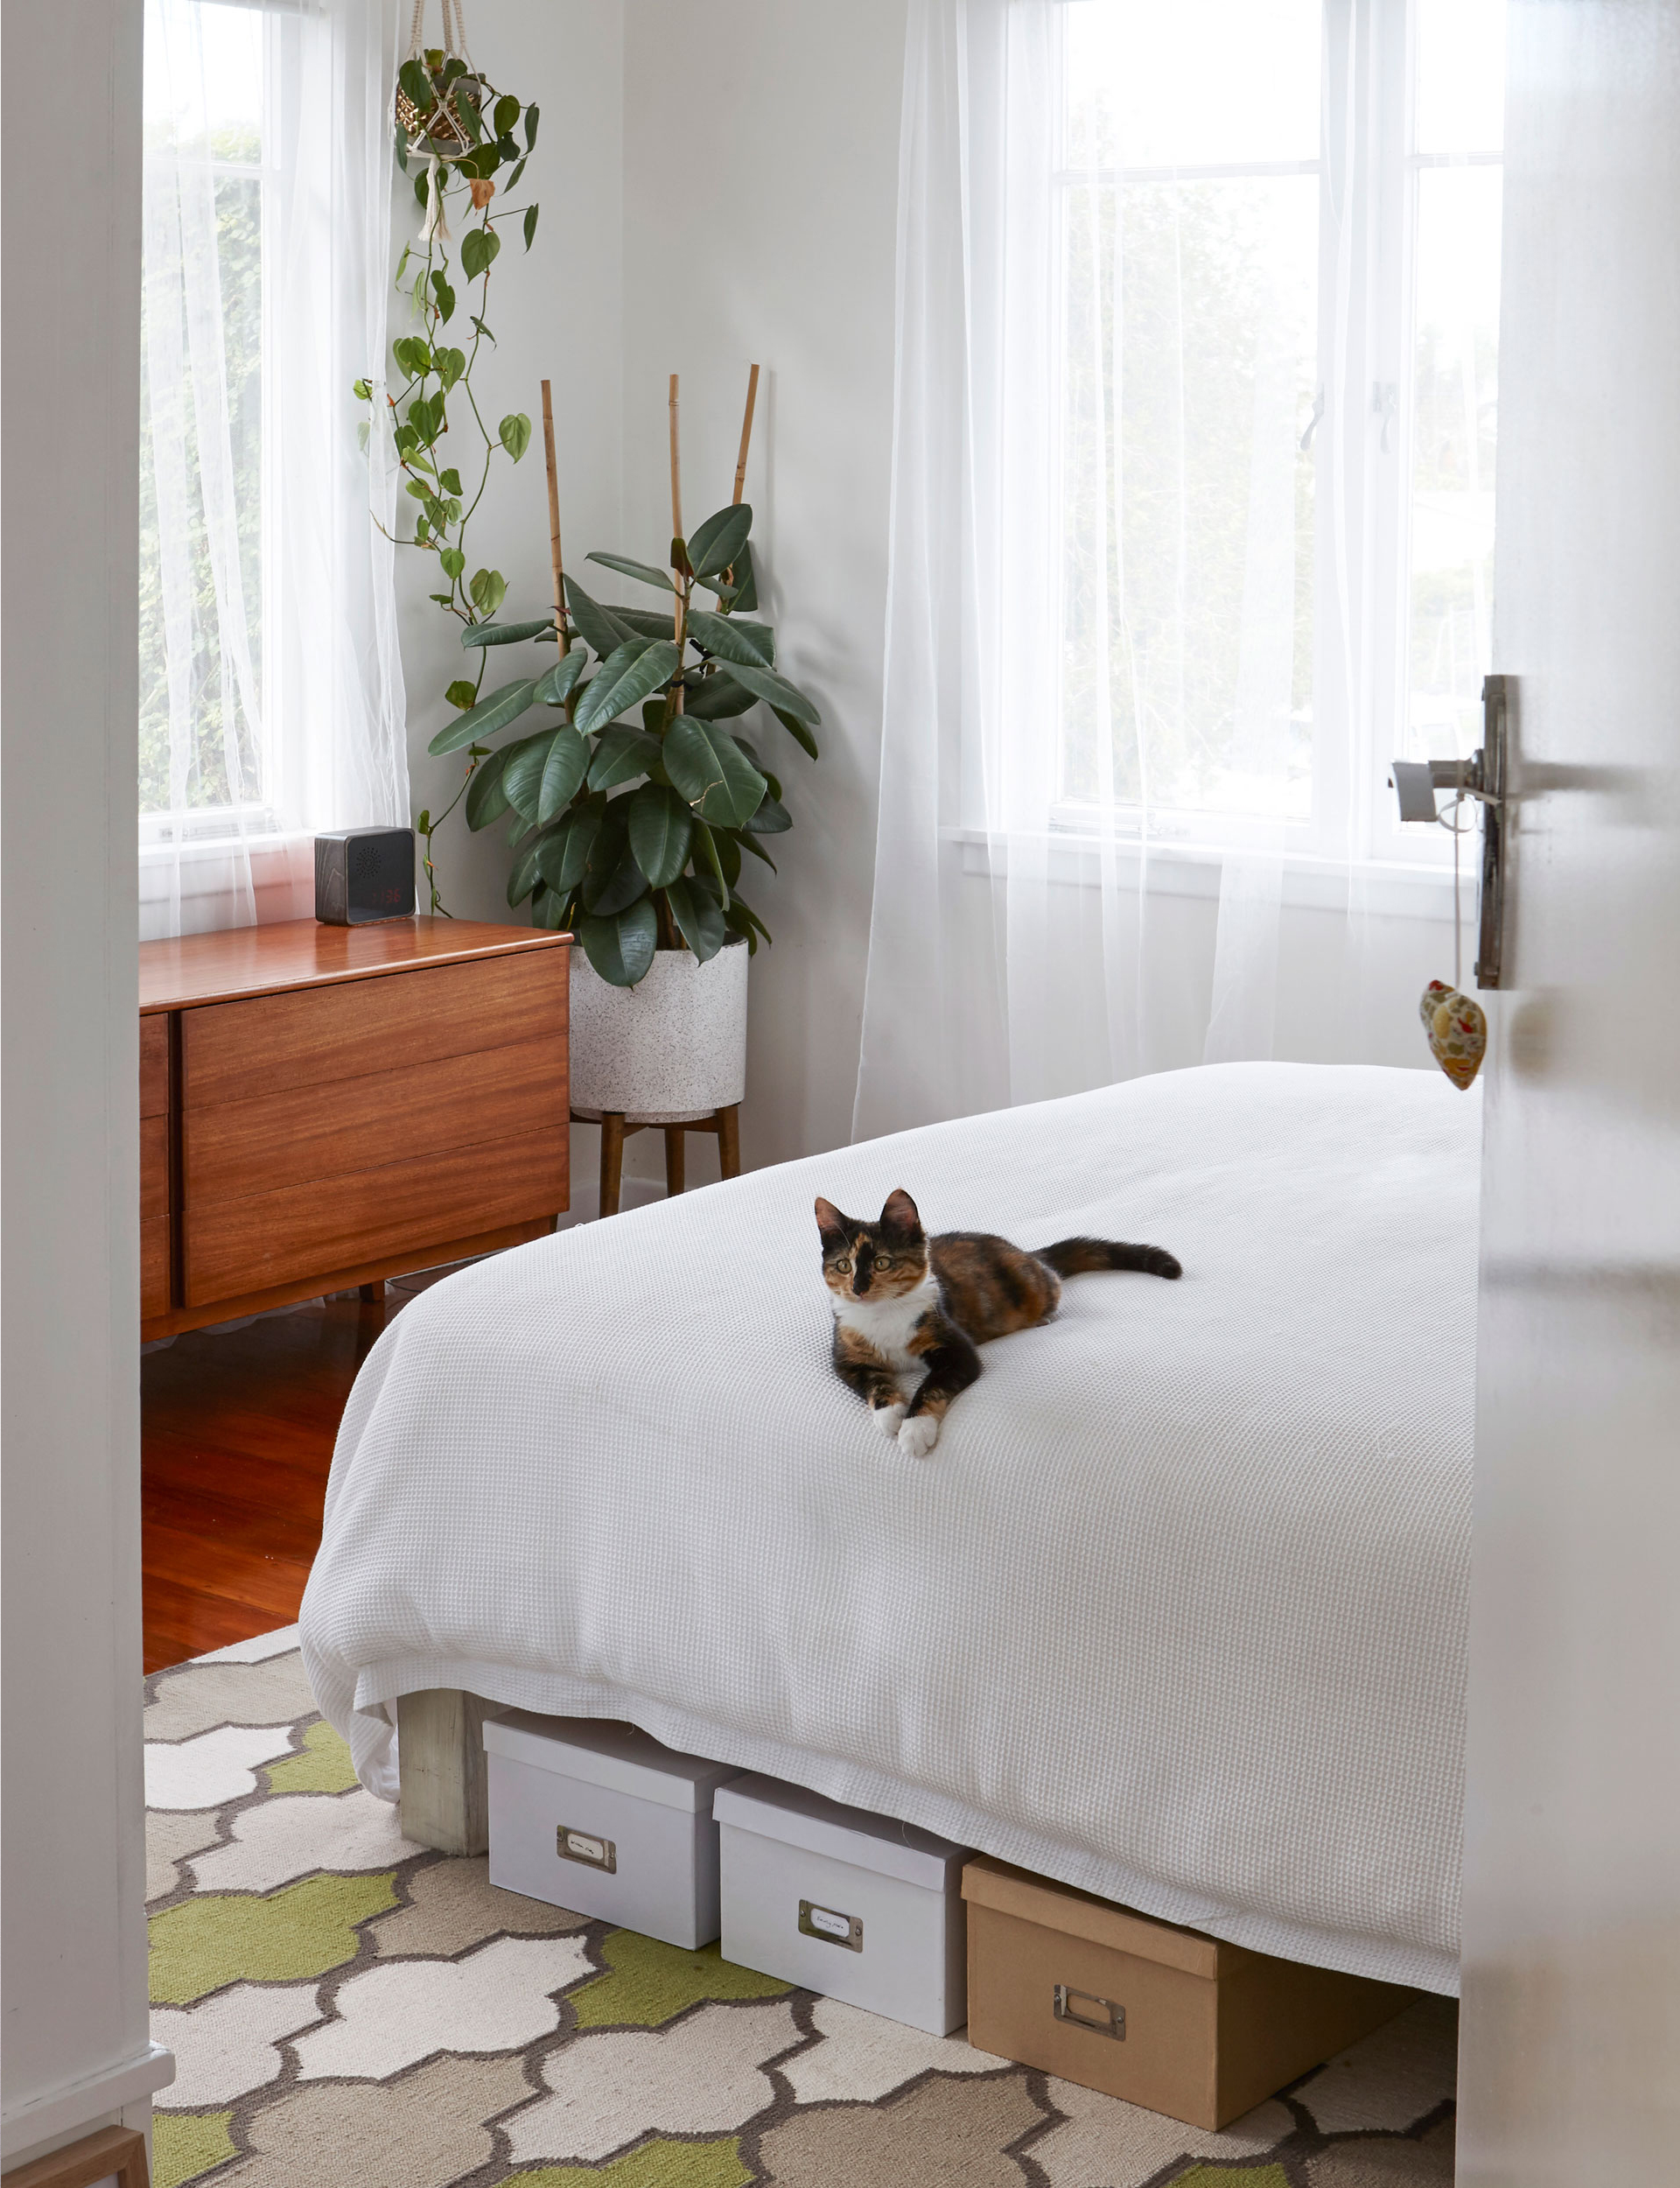 5 Tips That'll Help You Make the Most of a Small Space